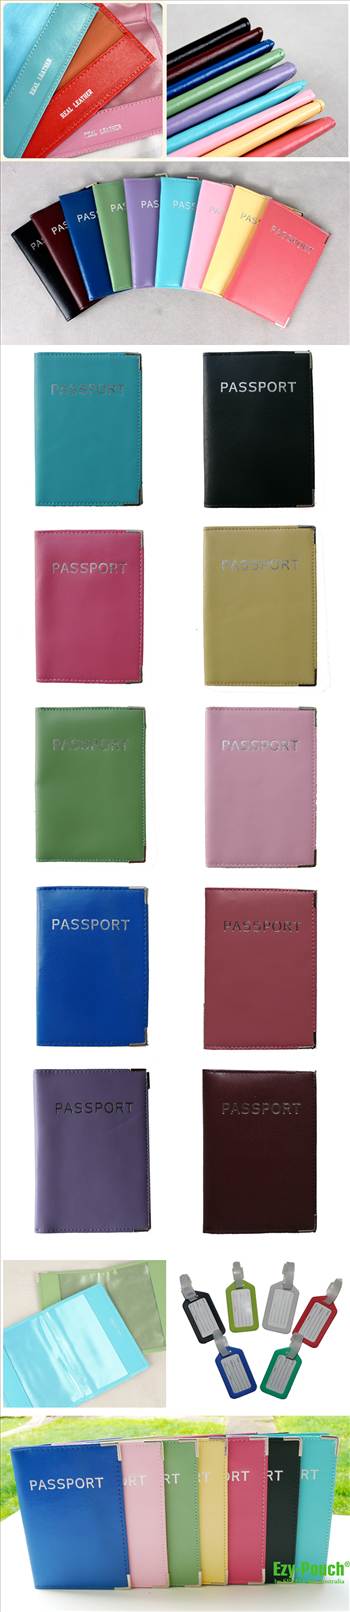 GENUINE LEATHER PASSPORT PROTECTOR-new.jpg by luce2339